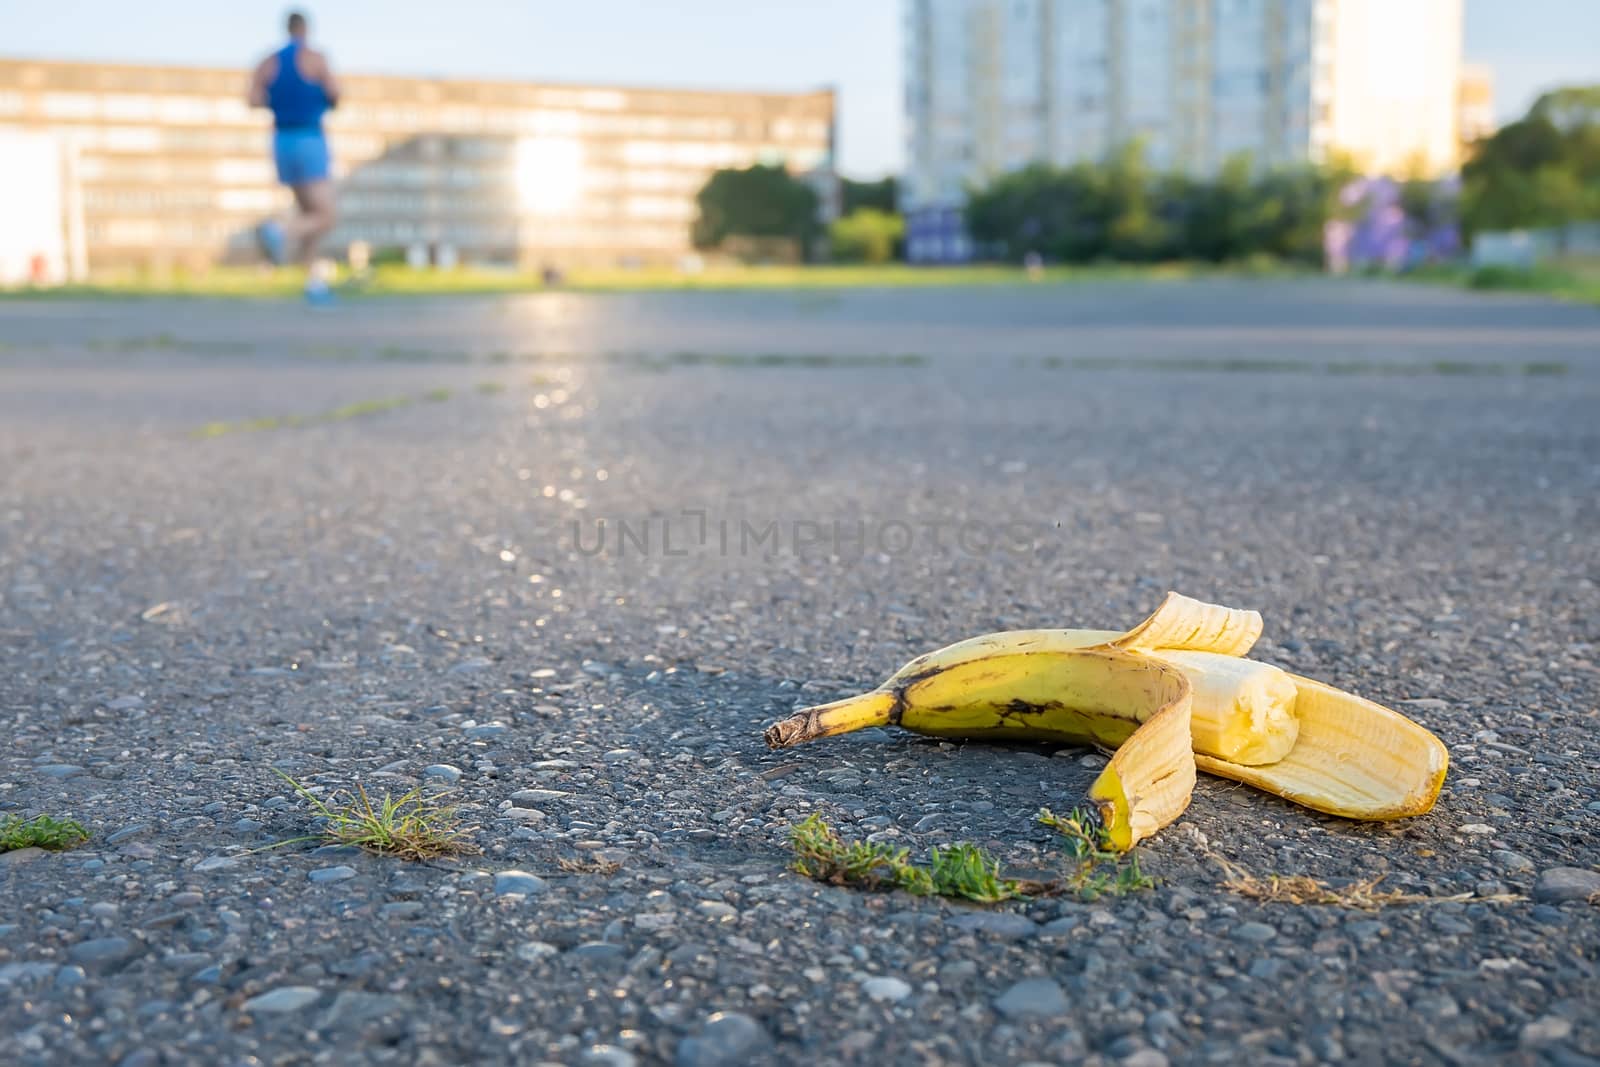 discarded bitten banana is lying on the running track of the stadium by jk3030